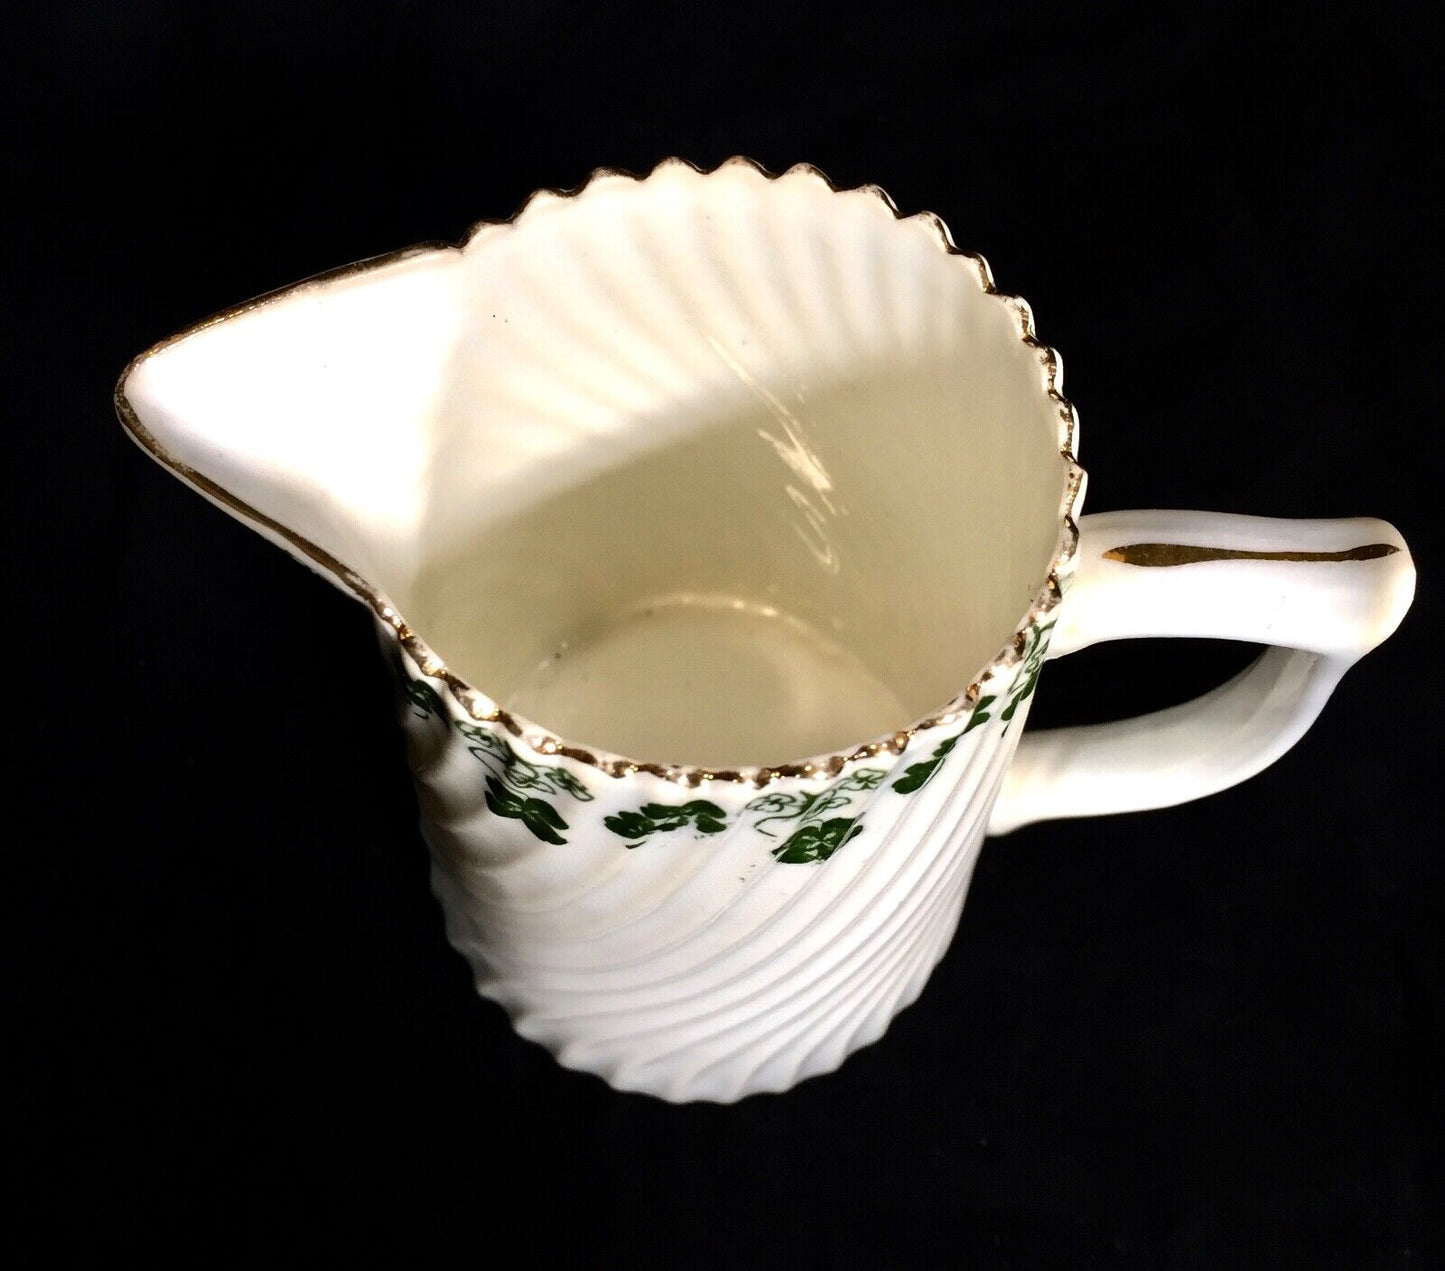 Antique Edwardian Green And White Tuscan Floral Tea set for 6 People Cup Saucer